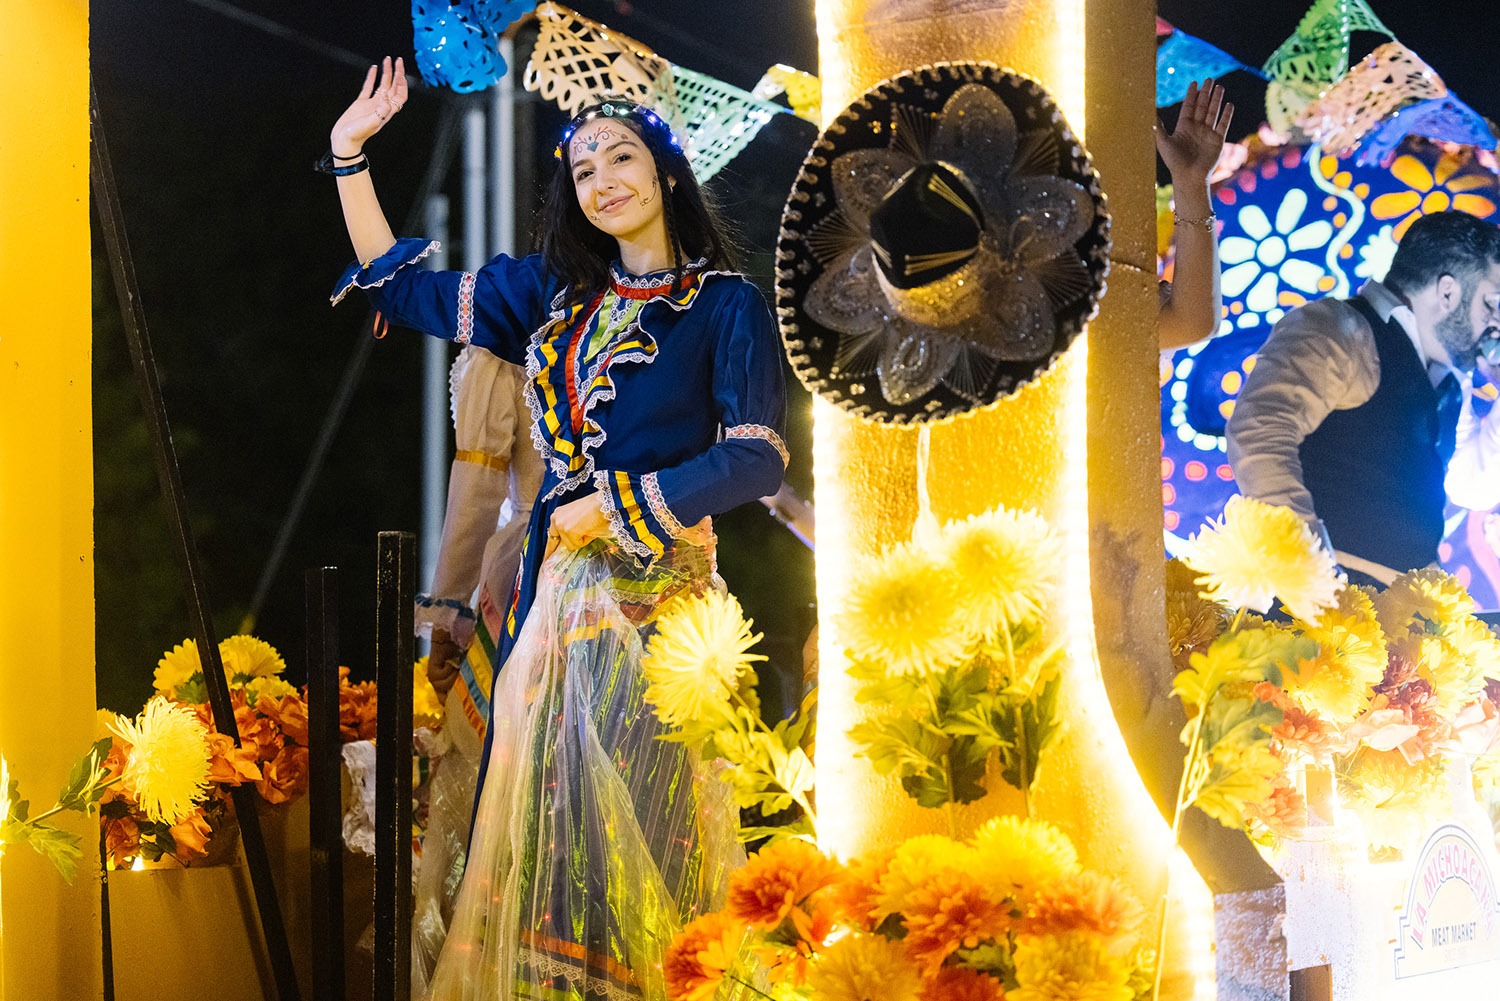 Thousands of people attend the Fiesta Flambeau Parade on Saturday, April 9, 2022, in San Antonio, Texas. Photo by Chris Stokes | Heron contributor